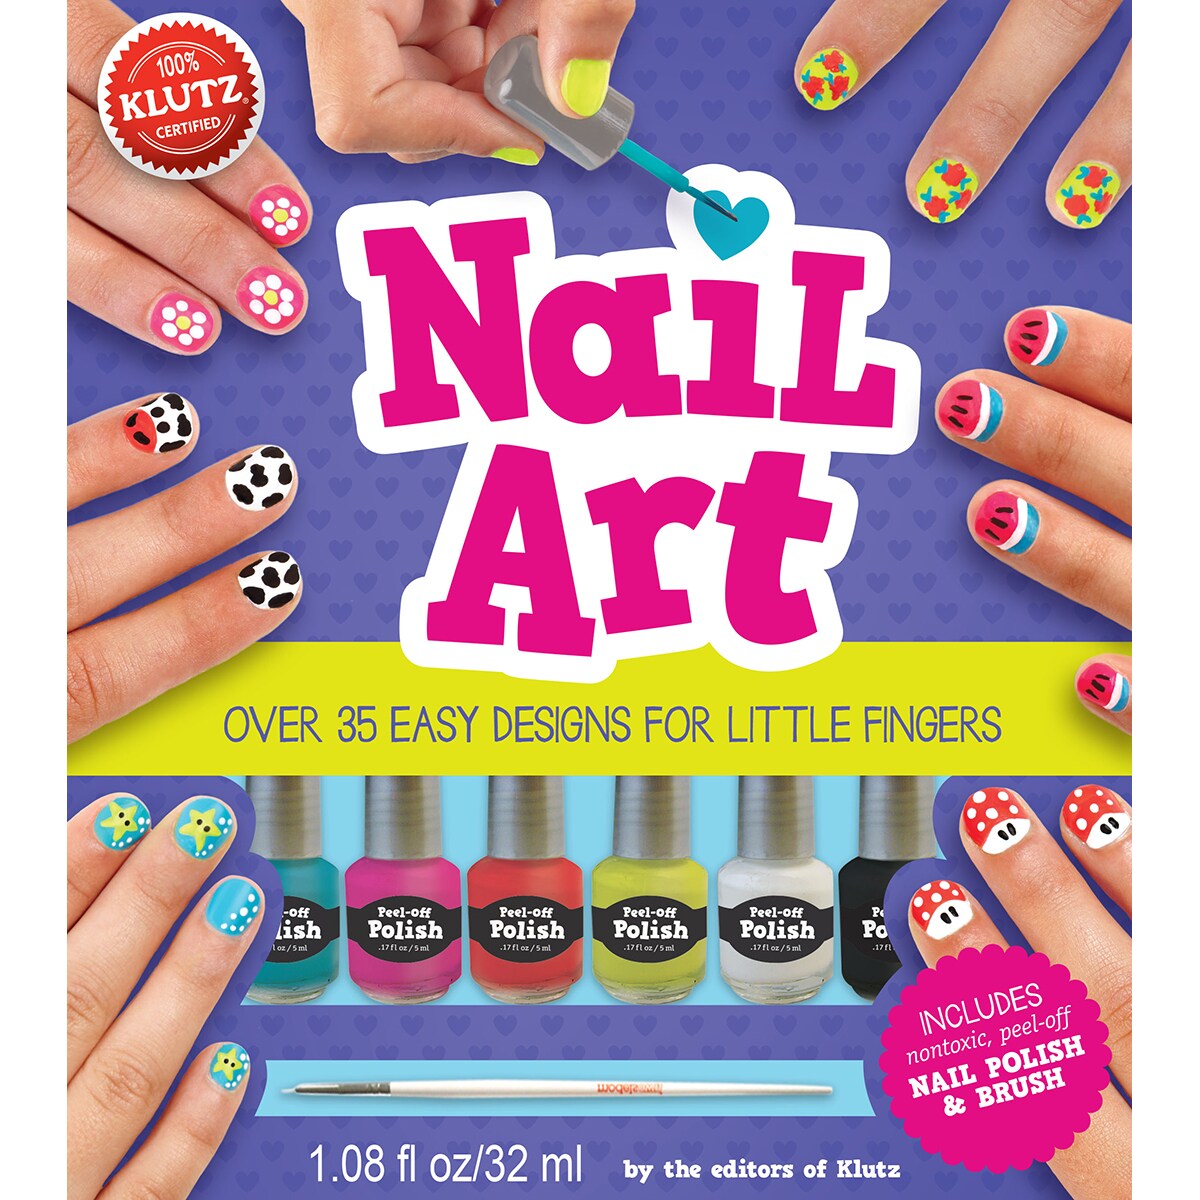 One Stroke Flowers: How to Create Beautiful Nail Art Flower Decorations  With One Stroke Painting Technique? eBook by Tanya Angelova - EPUB Book |  Rakuten Kobo India